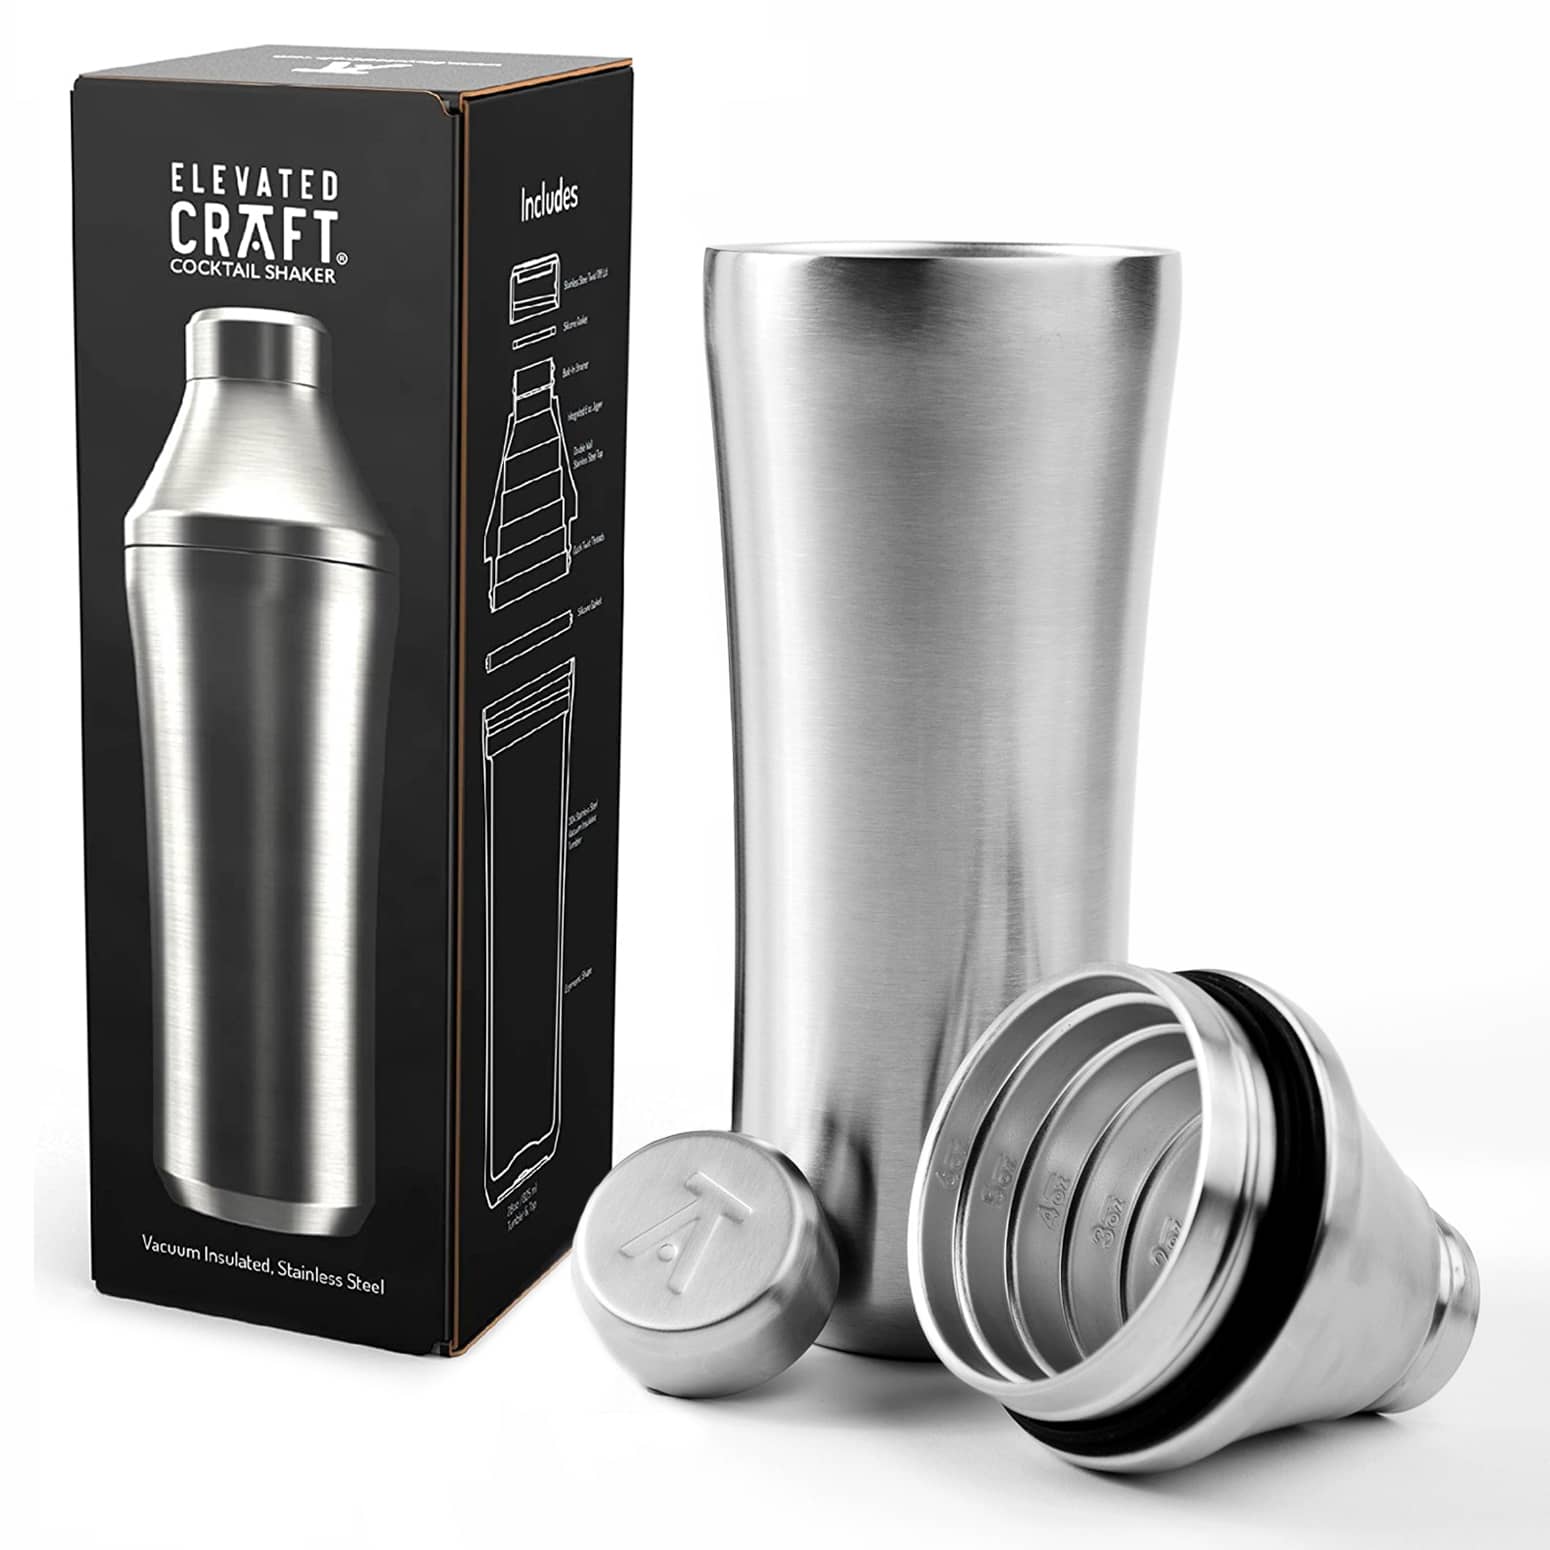 Elevated Craft Hybrid Cocktail Shaker - Built-In Jigger / Double